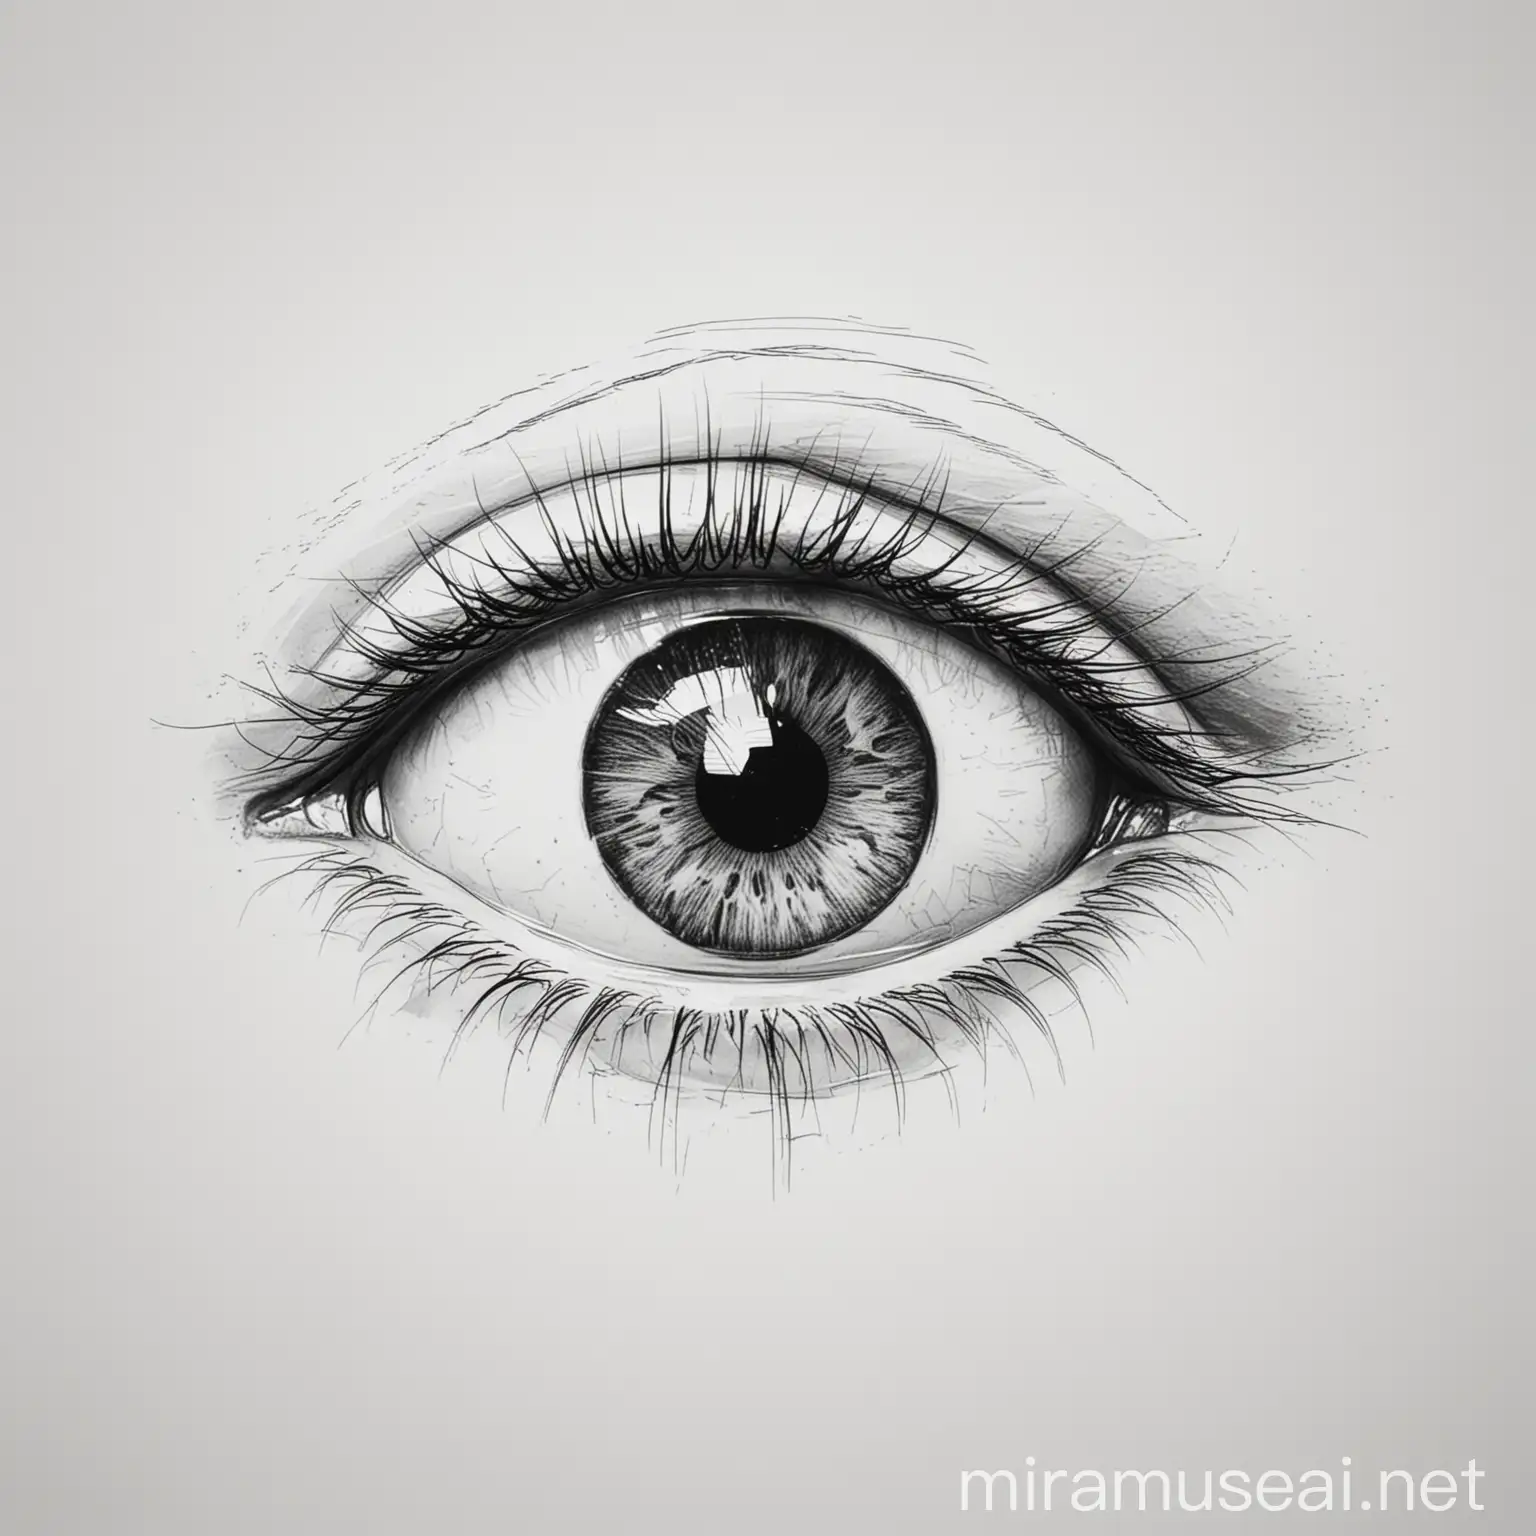 Minimalistic Sketch of a Human Eye in Line Art on White Paper